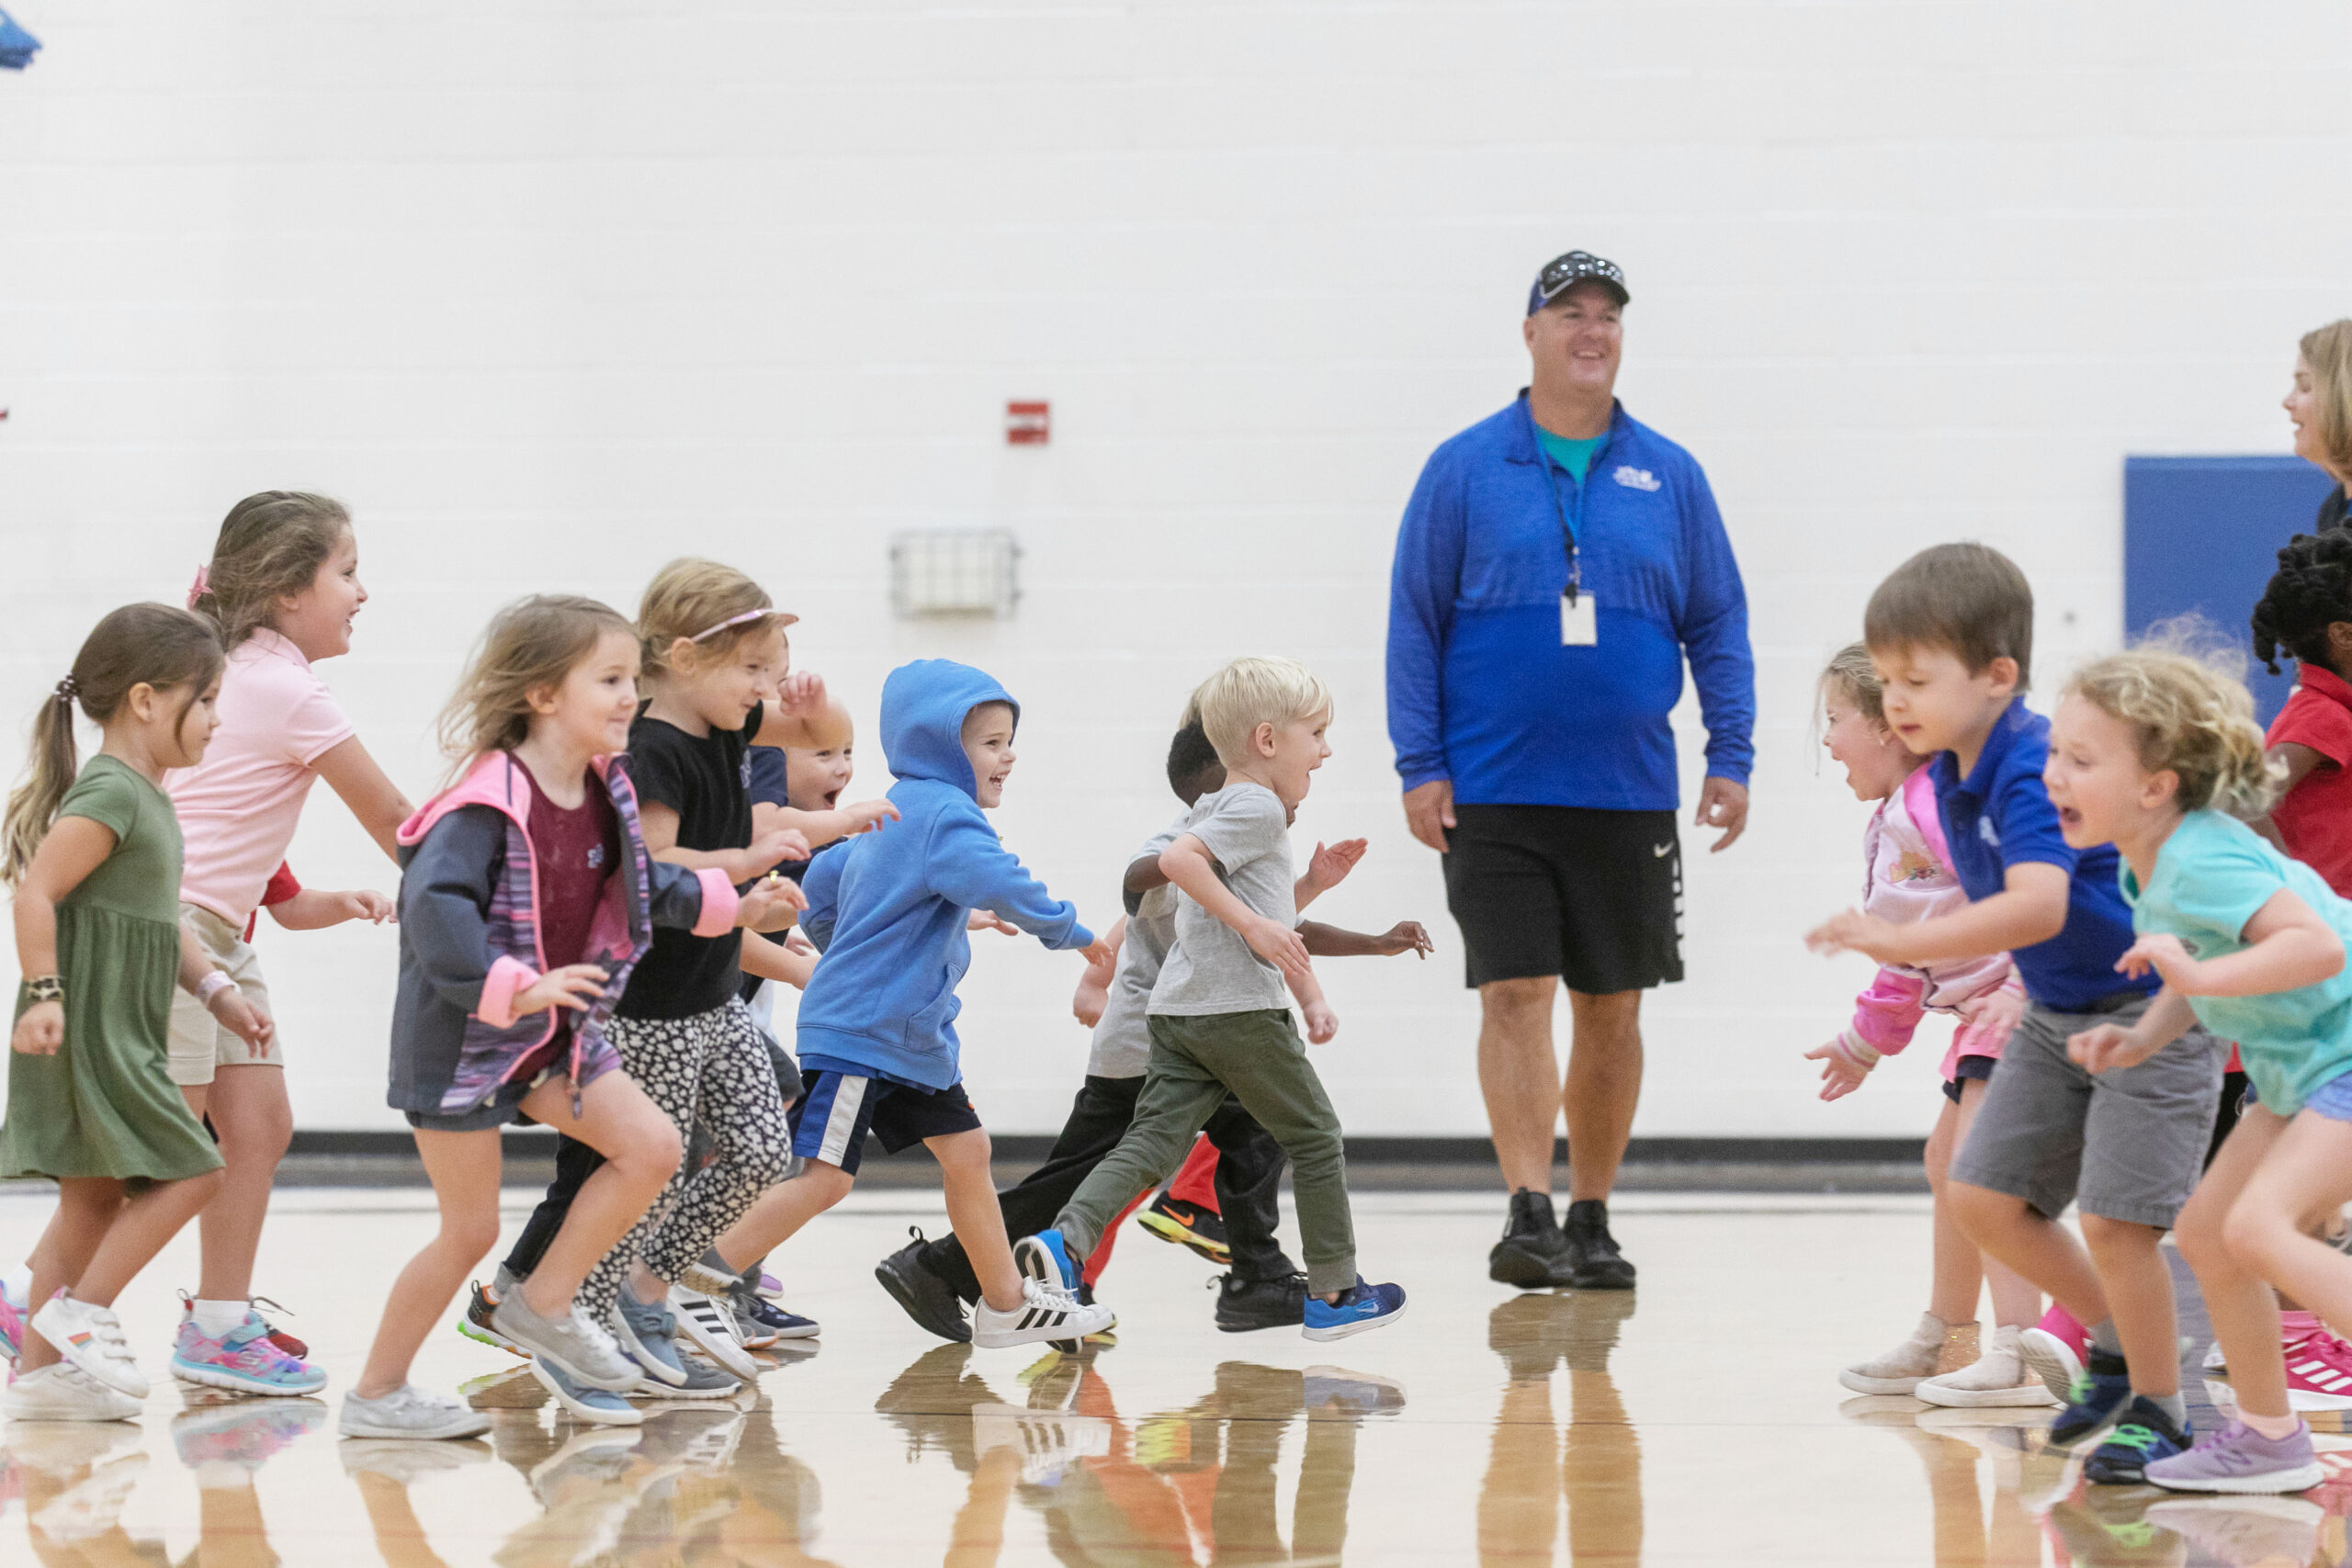 mike carl in the gym with several elementary children running around the gym